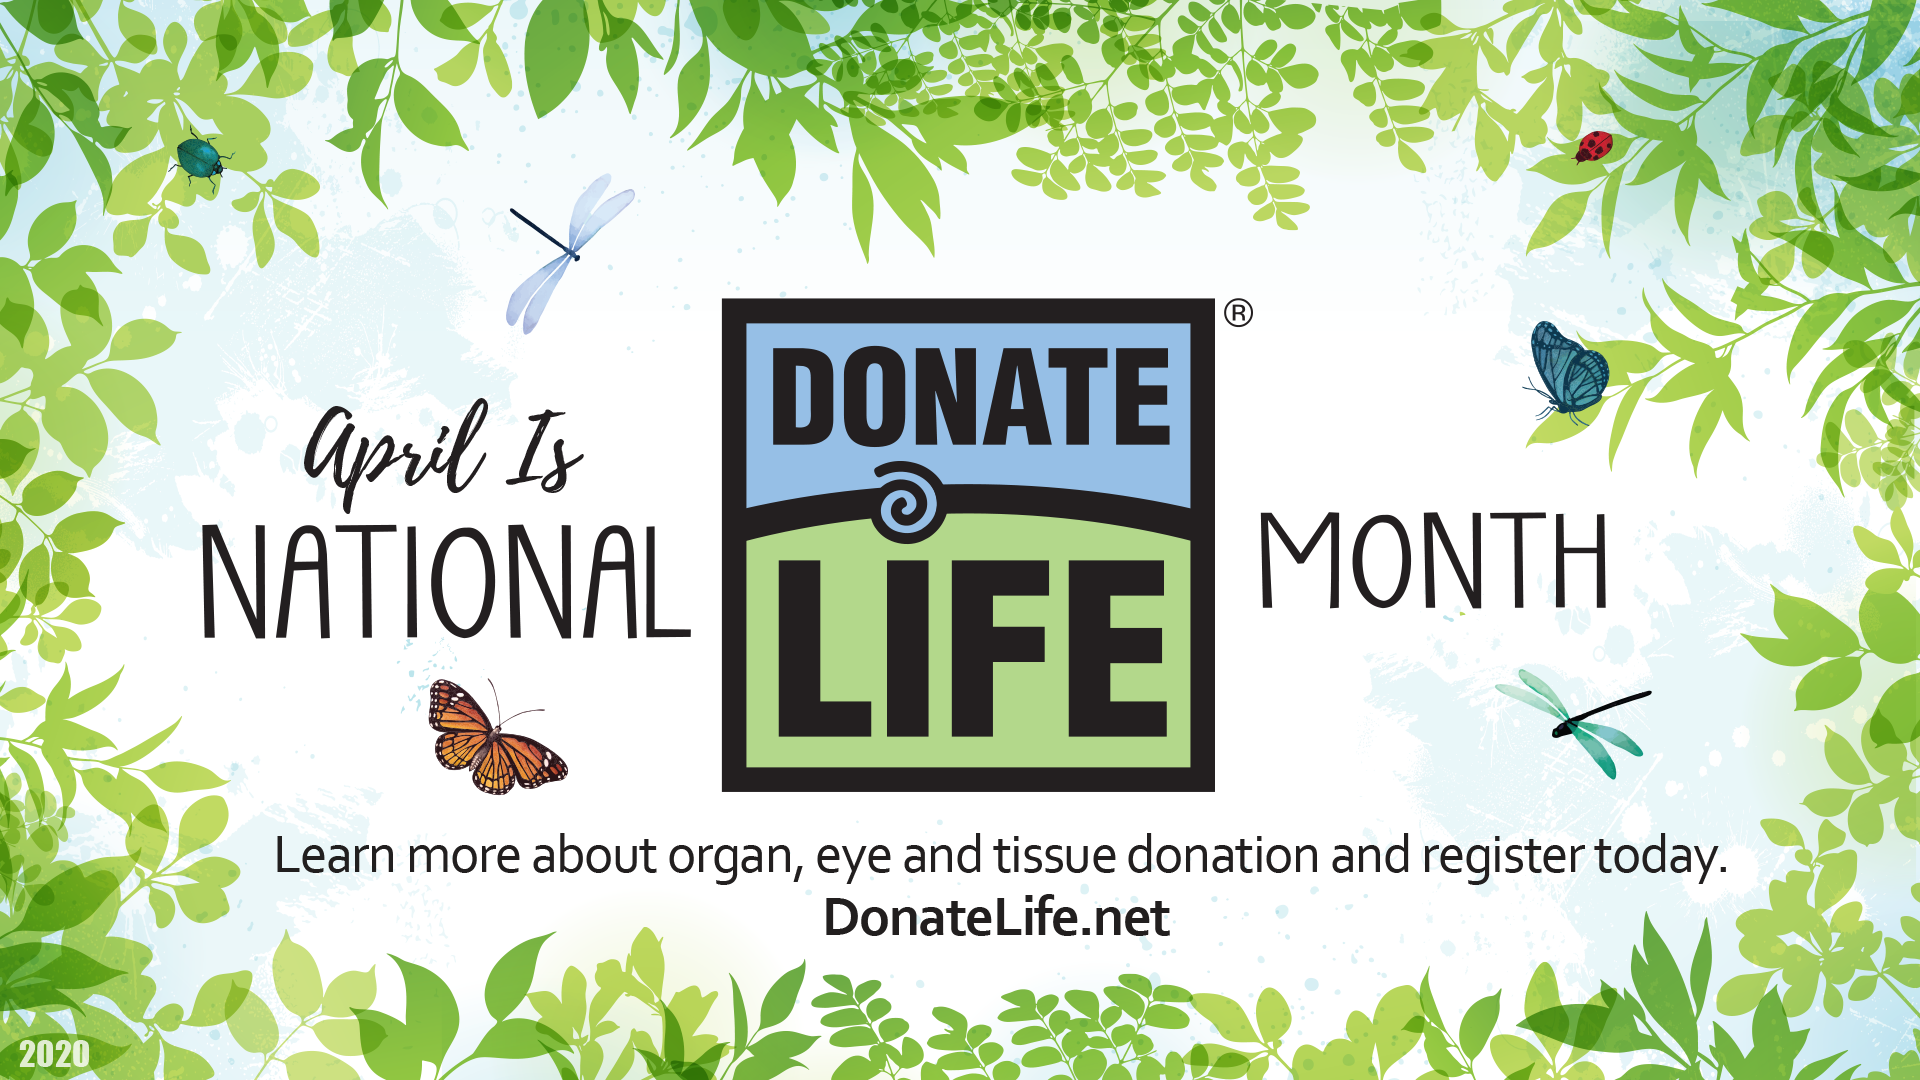 Donate Life Month